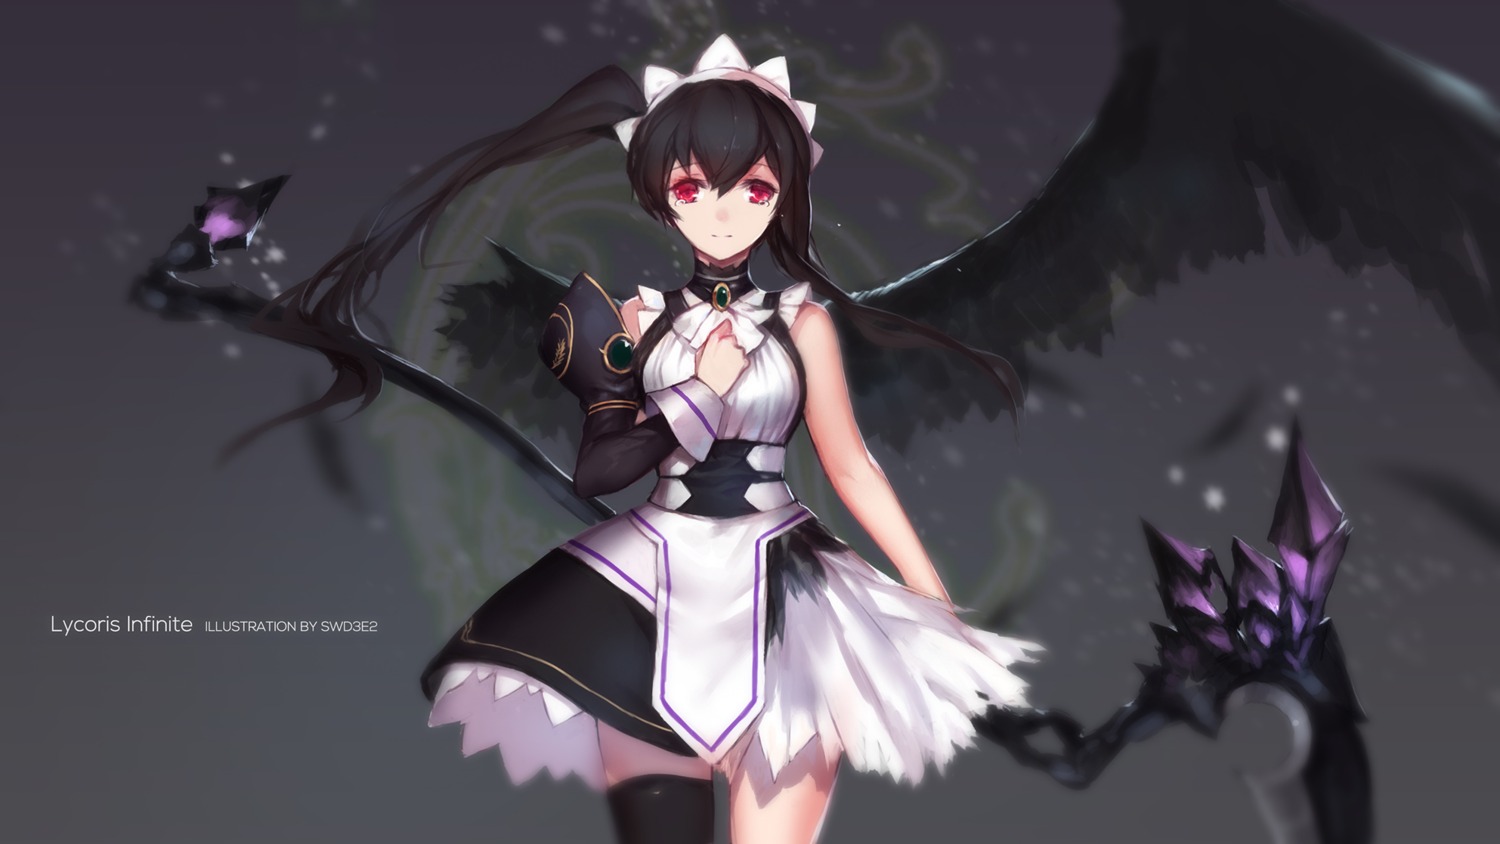 dress swd3e2 thighhighs weapon wings